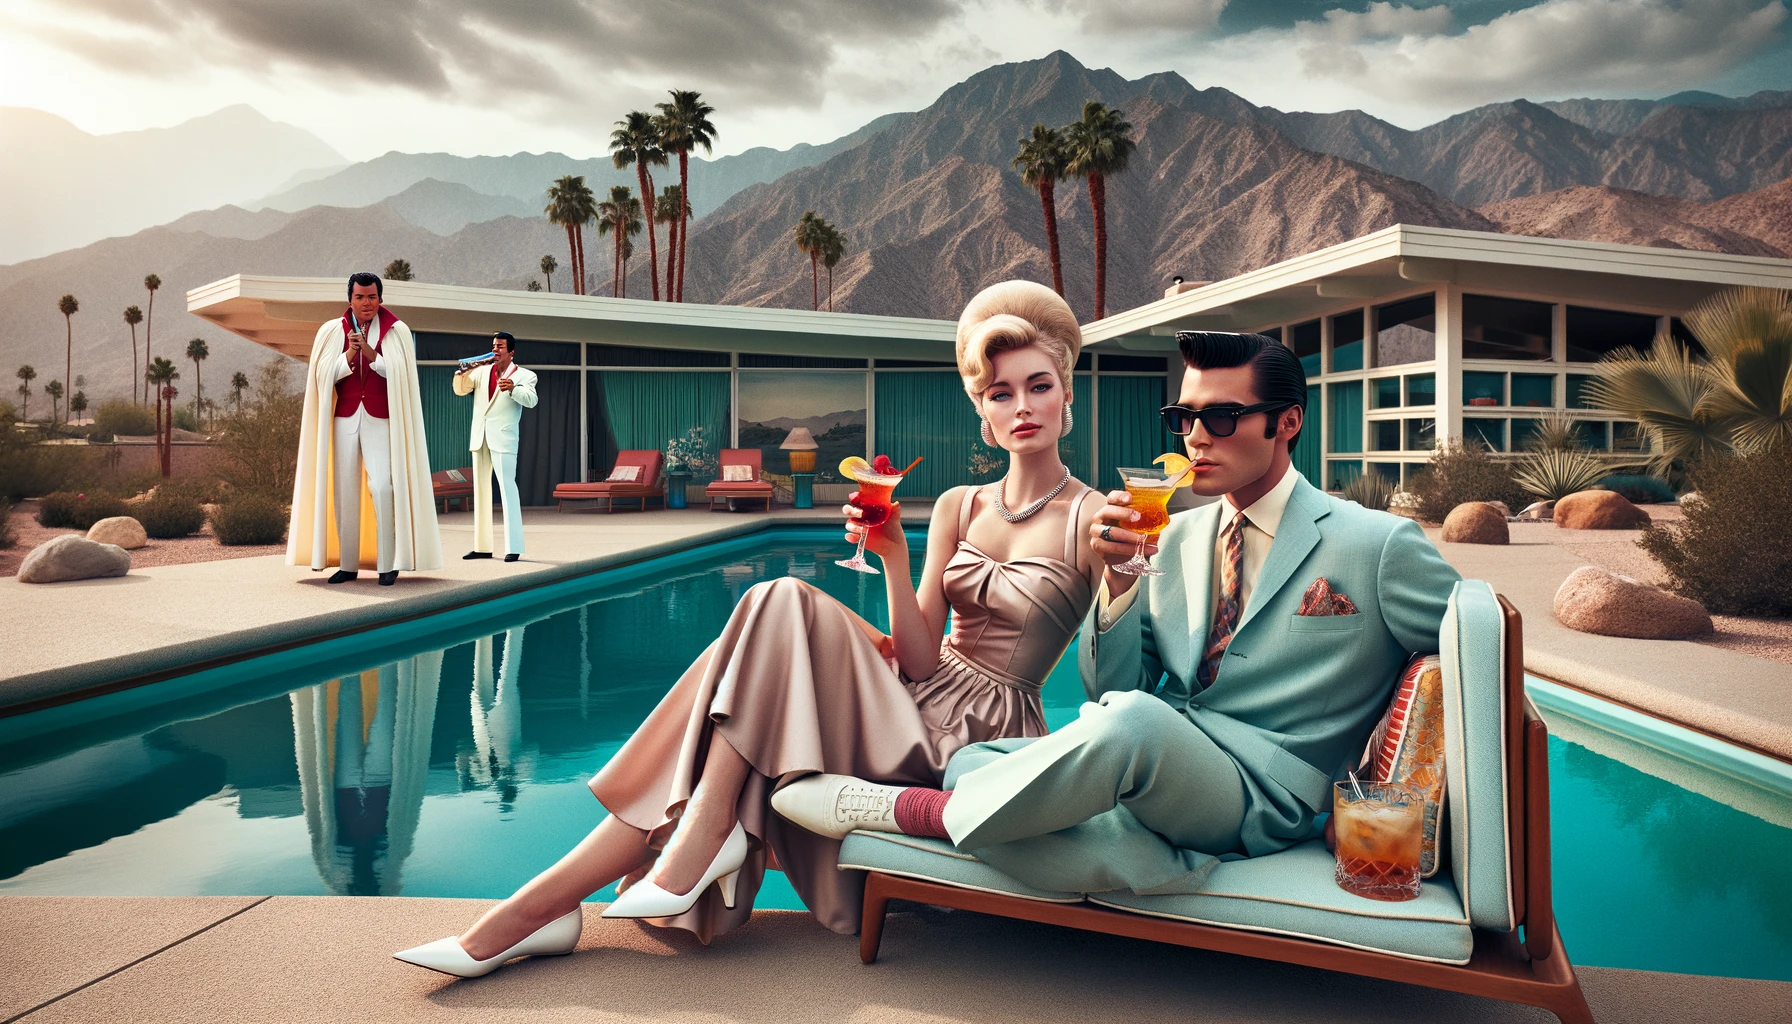  a stylish couple, reminiscent of Doris Day and Rock Hudson, lounging by a mid-century modern pool, with Elvis